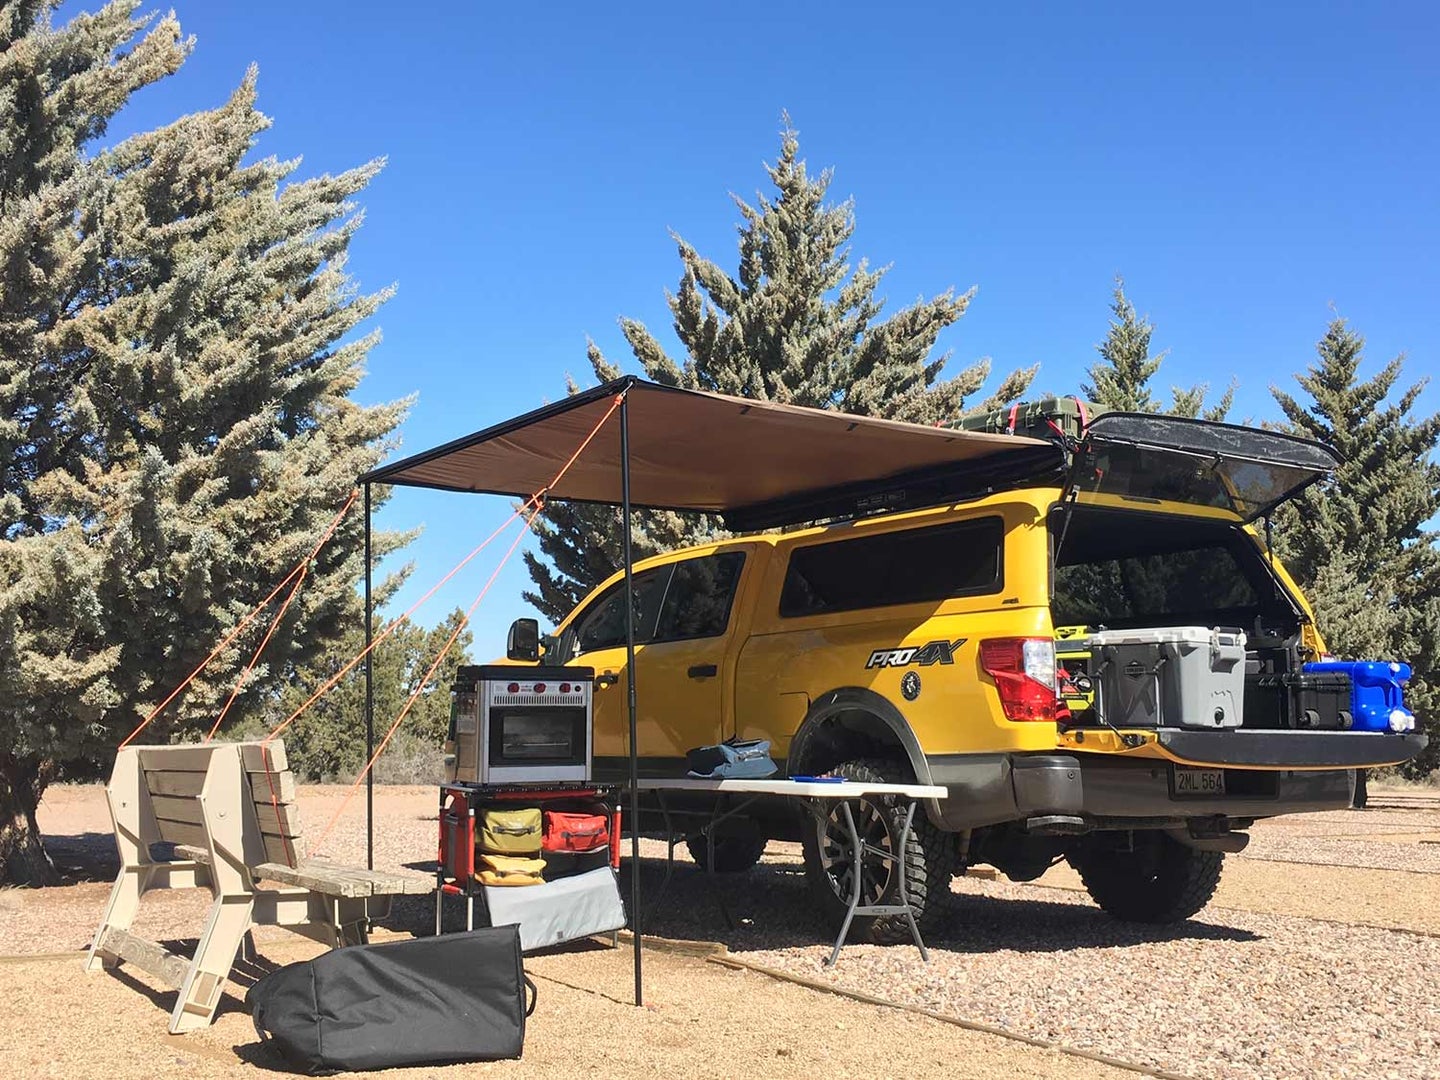 A truck turned into a mobile hunting camp.